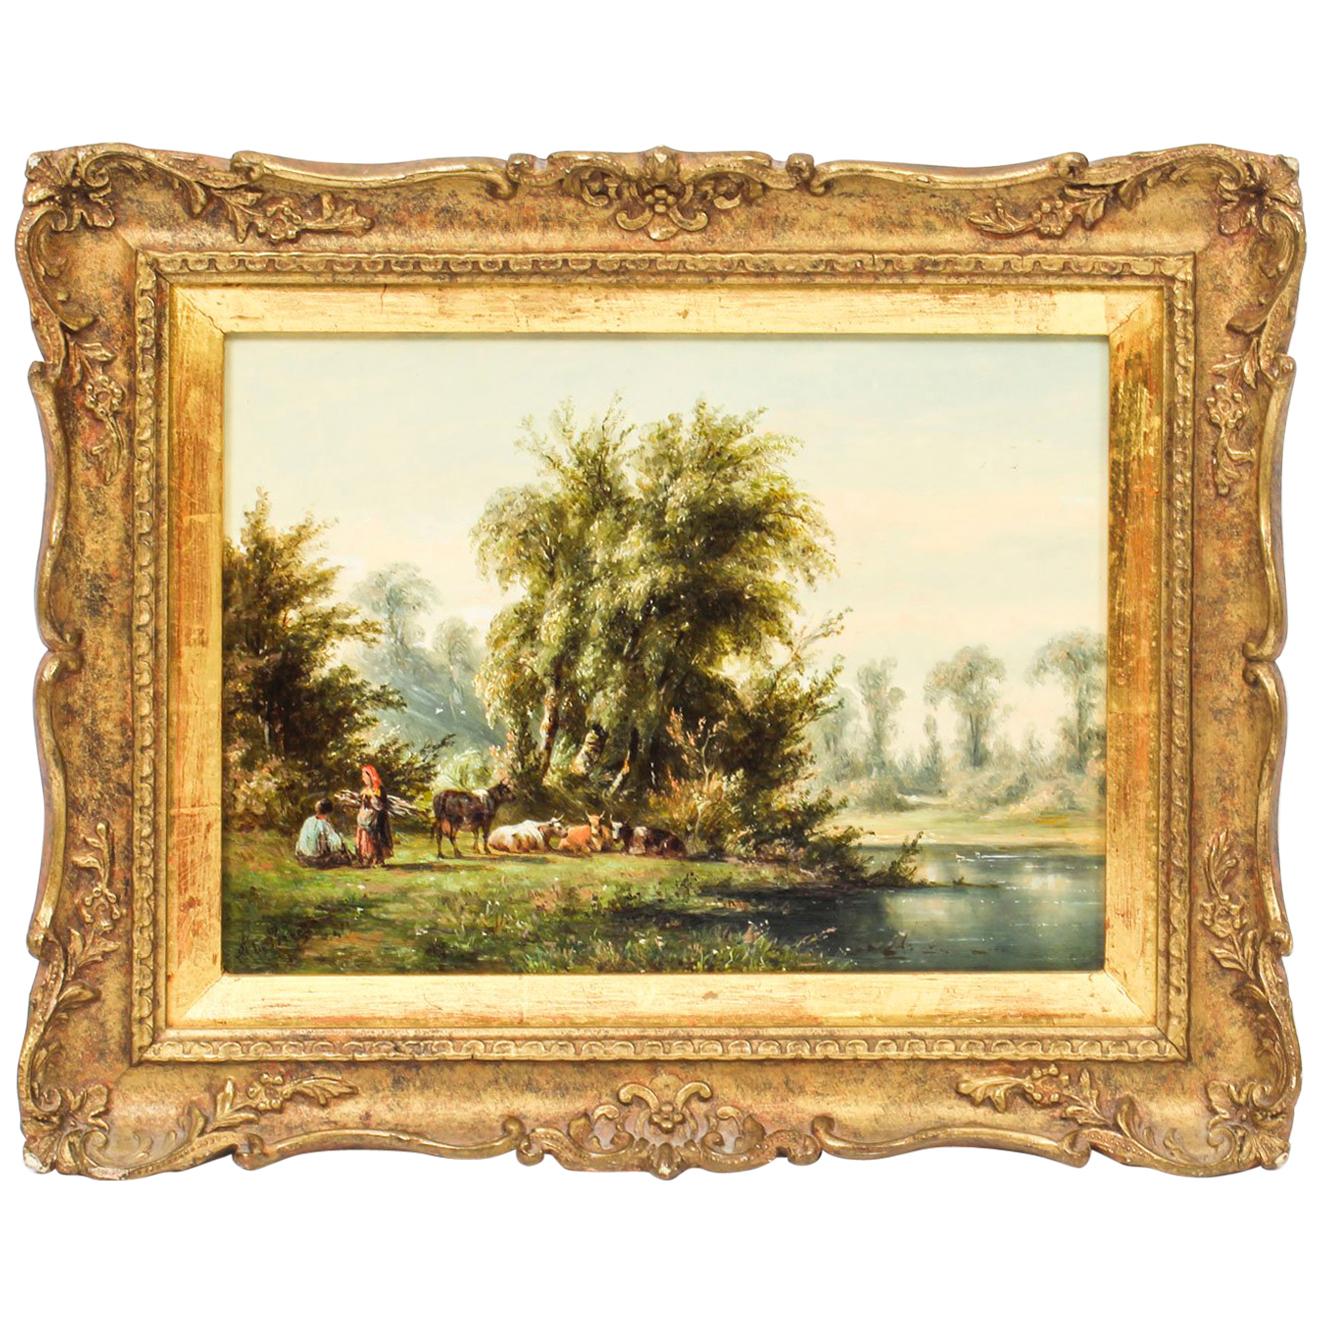 Antique Oil on Board Landscape Painting by Anthony De Bree, 19th Century